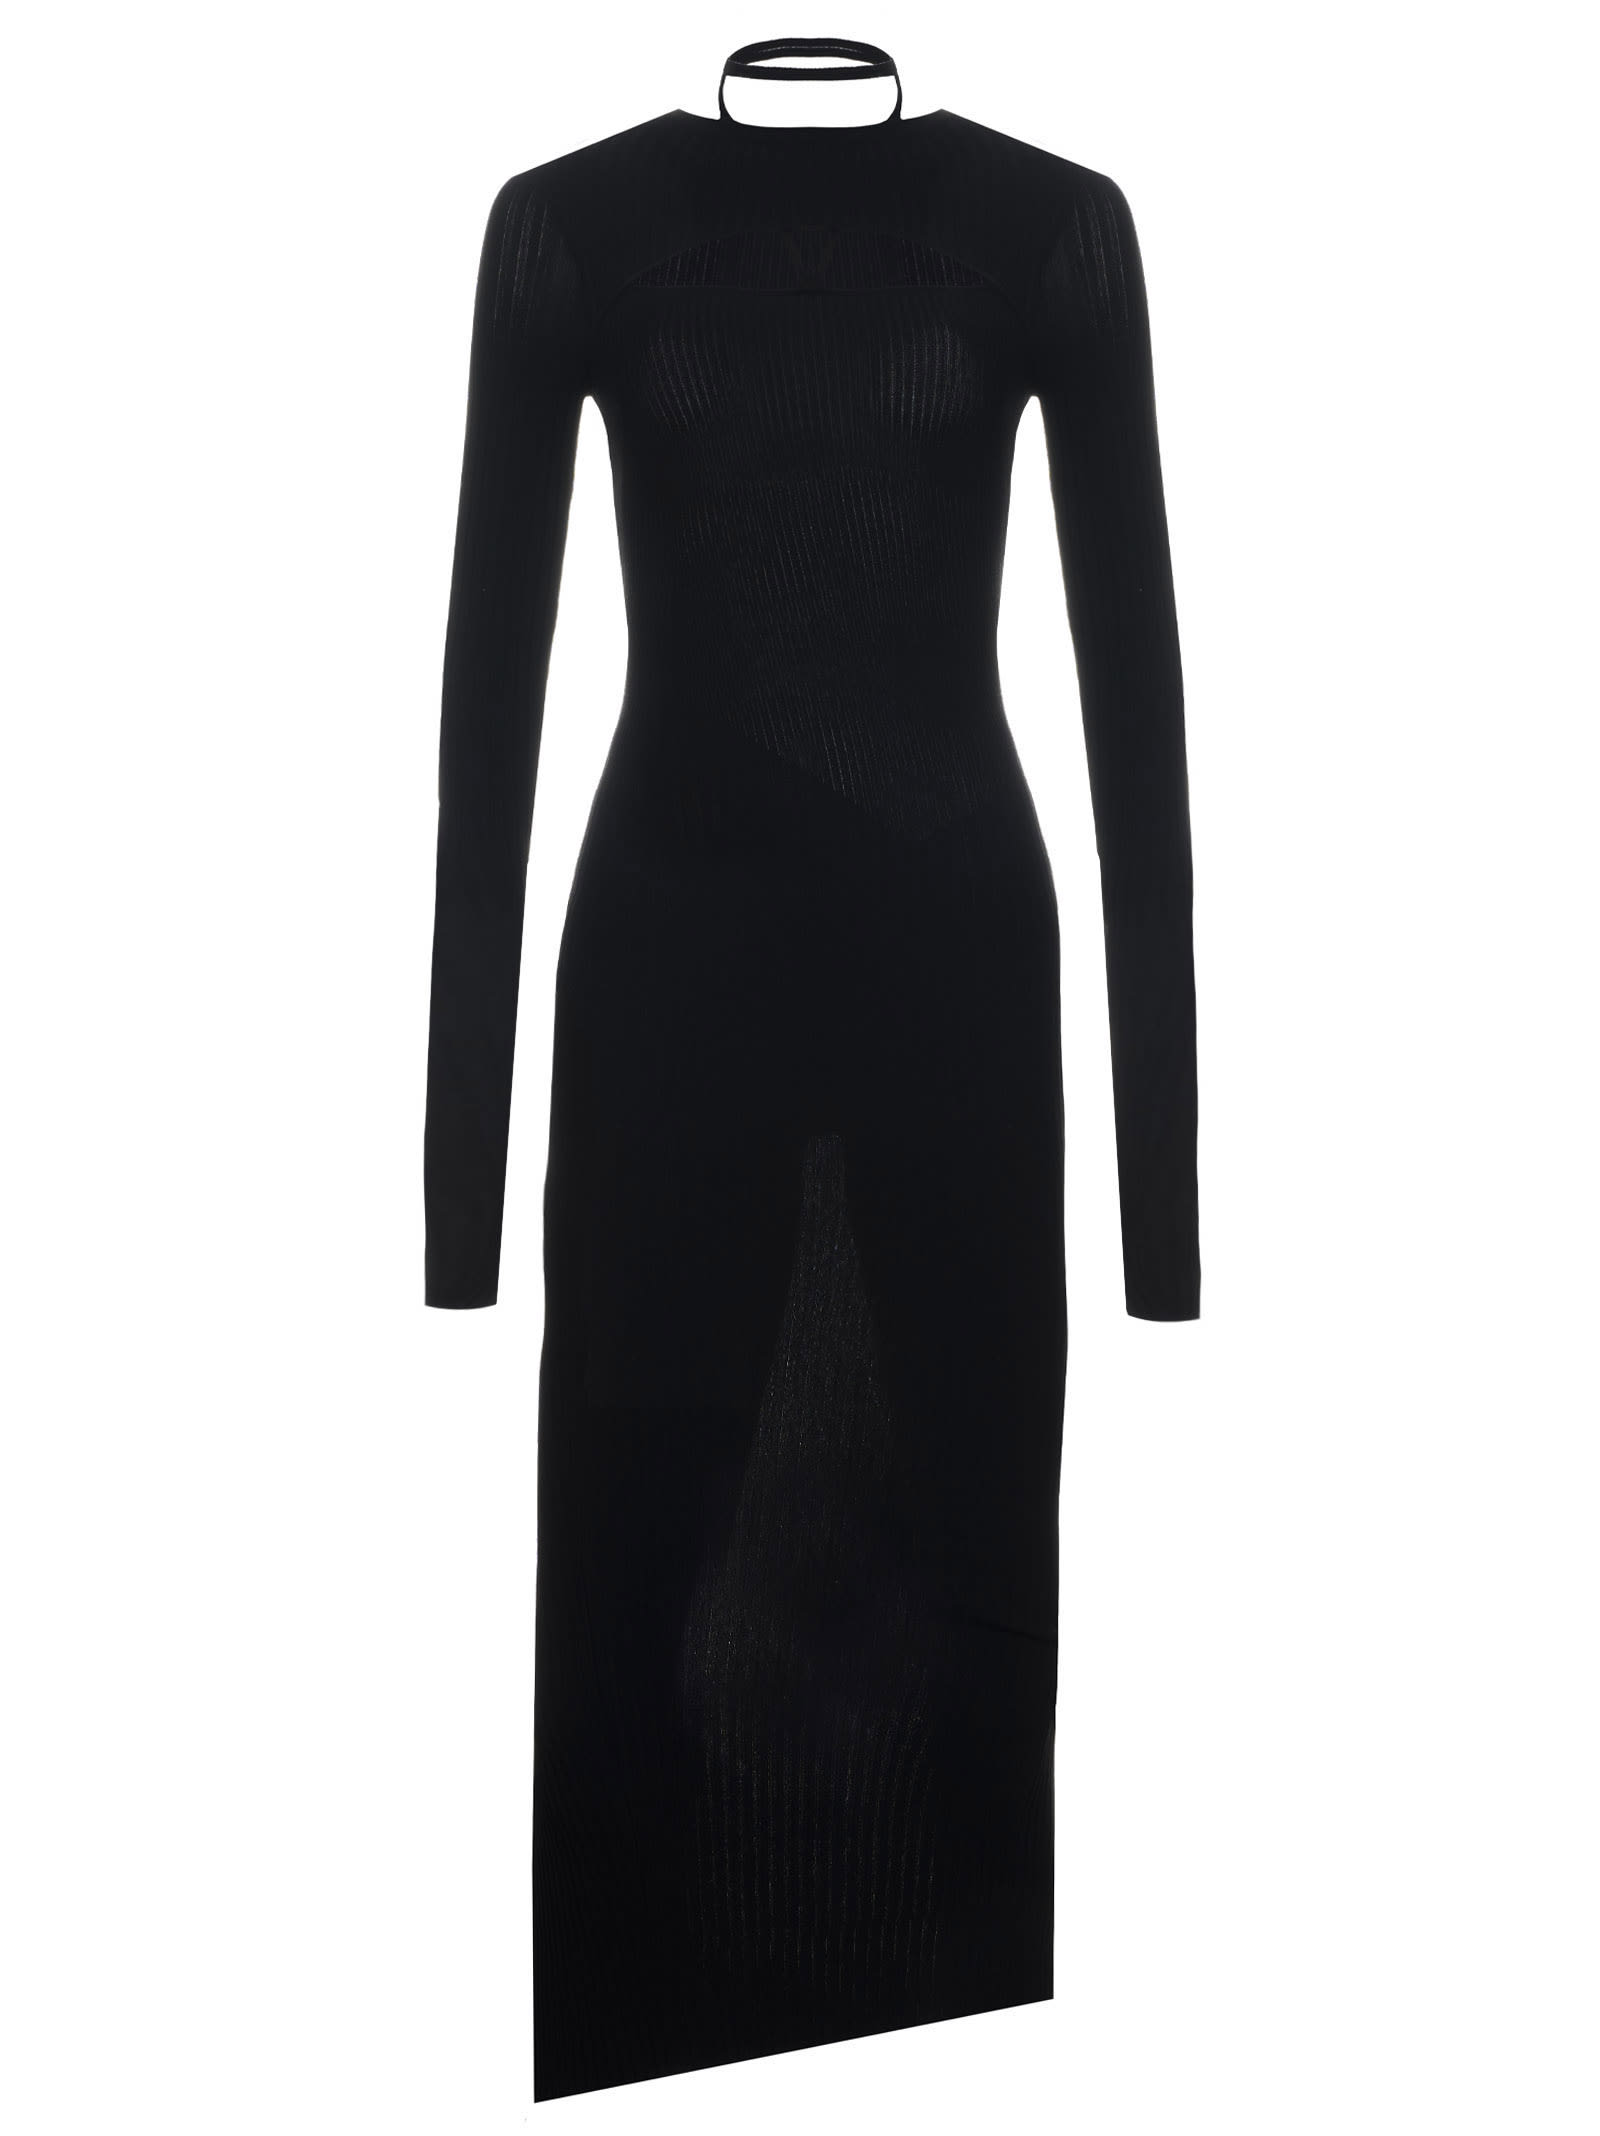 Andrea Adamo Ribbed Knit Midi Dress With Cut-out